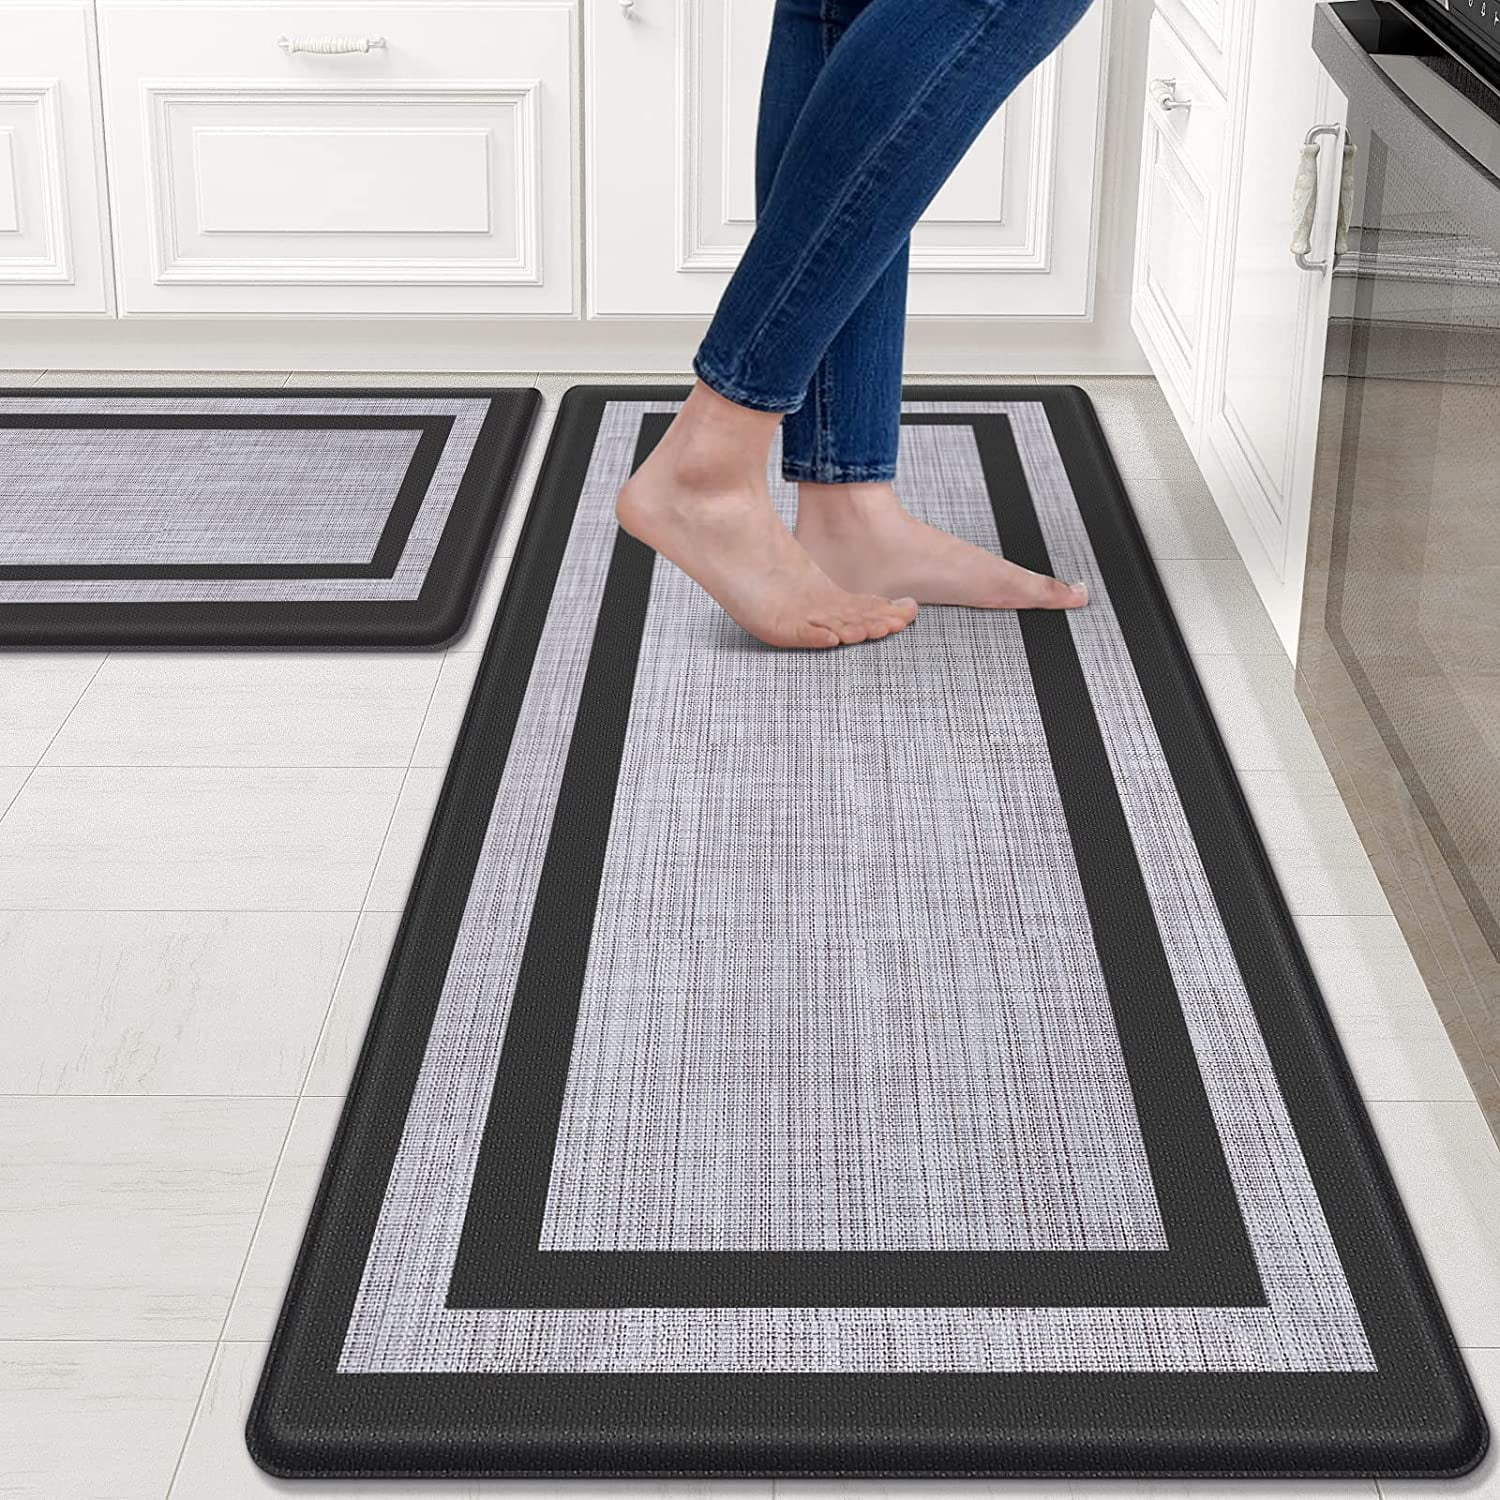 Lab Two Laundry Shop Standing Anti-Fatigue Floor Mats-Comfort in Kitchen 